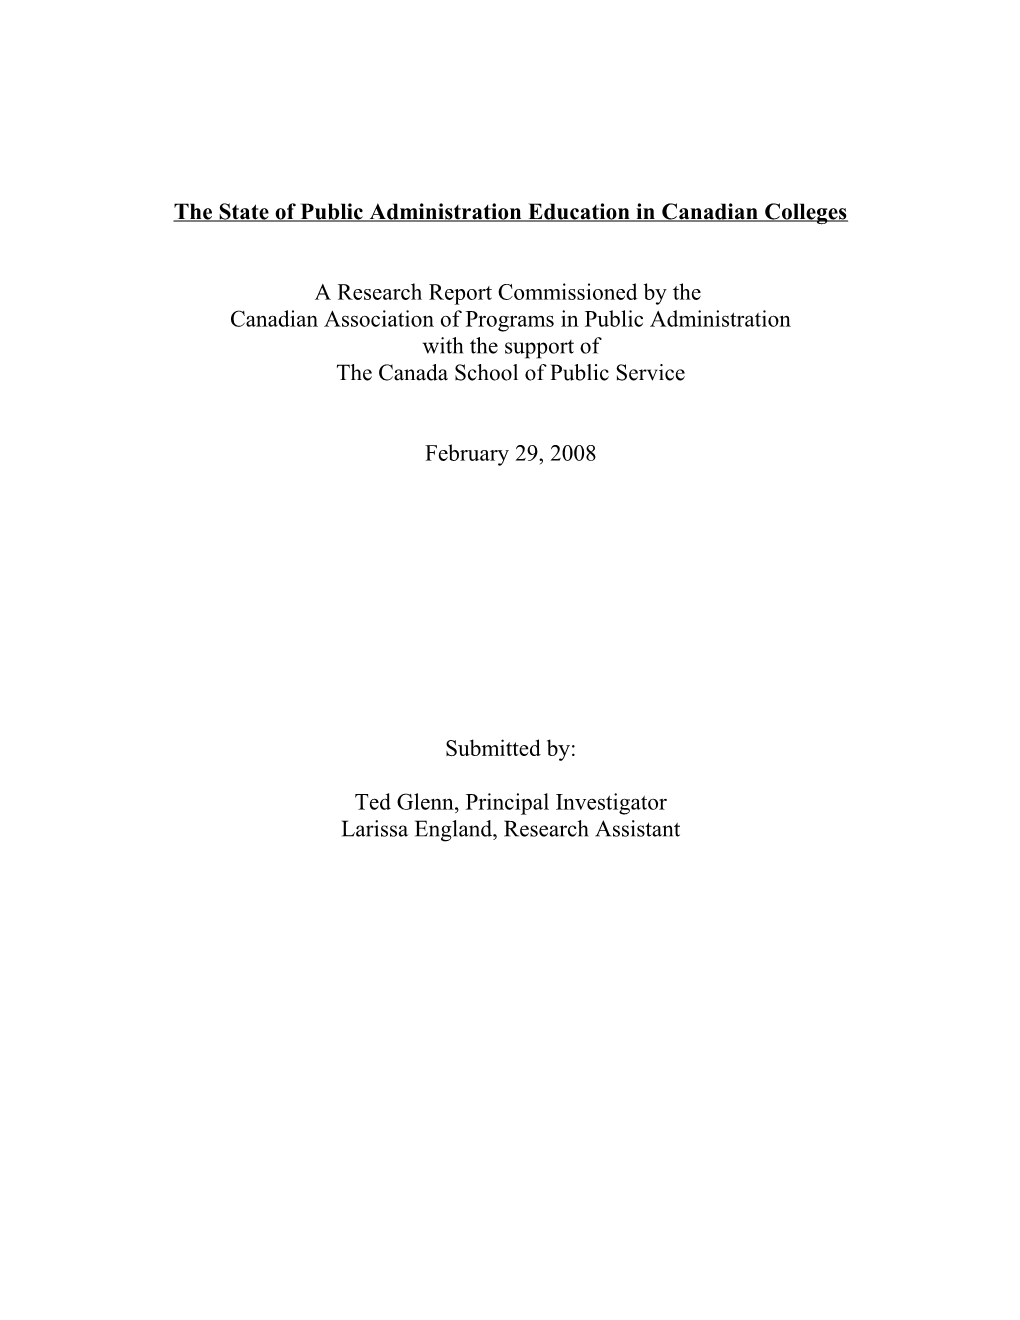 The State of Public Administration Education in Canadian Colleges